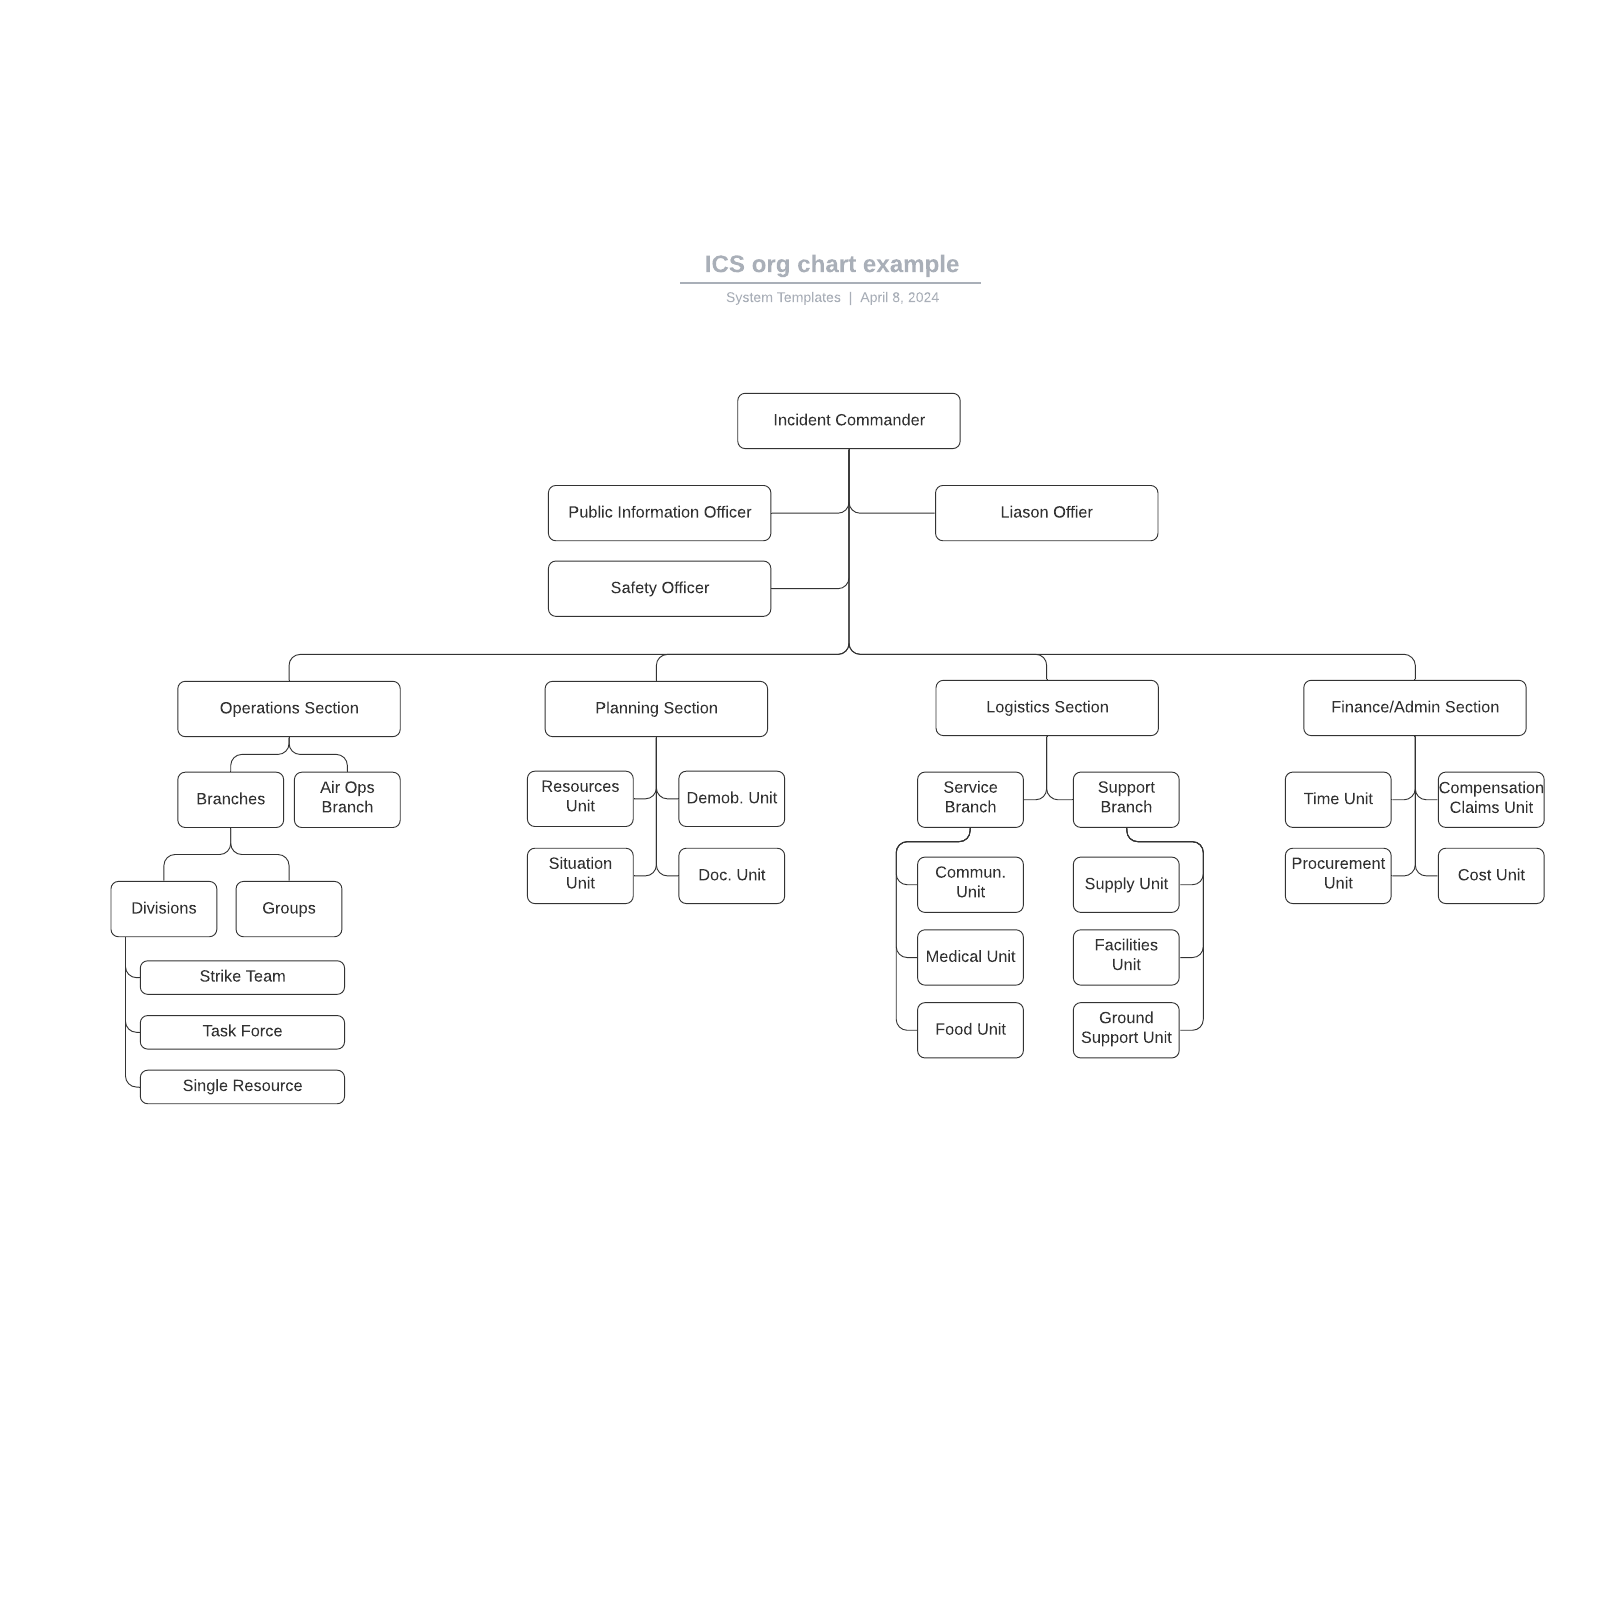 ICS org chart example example